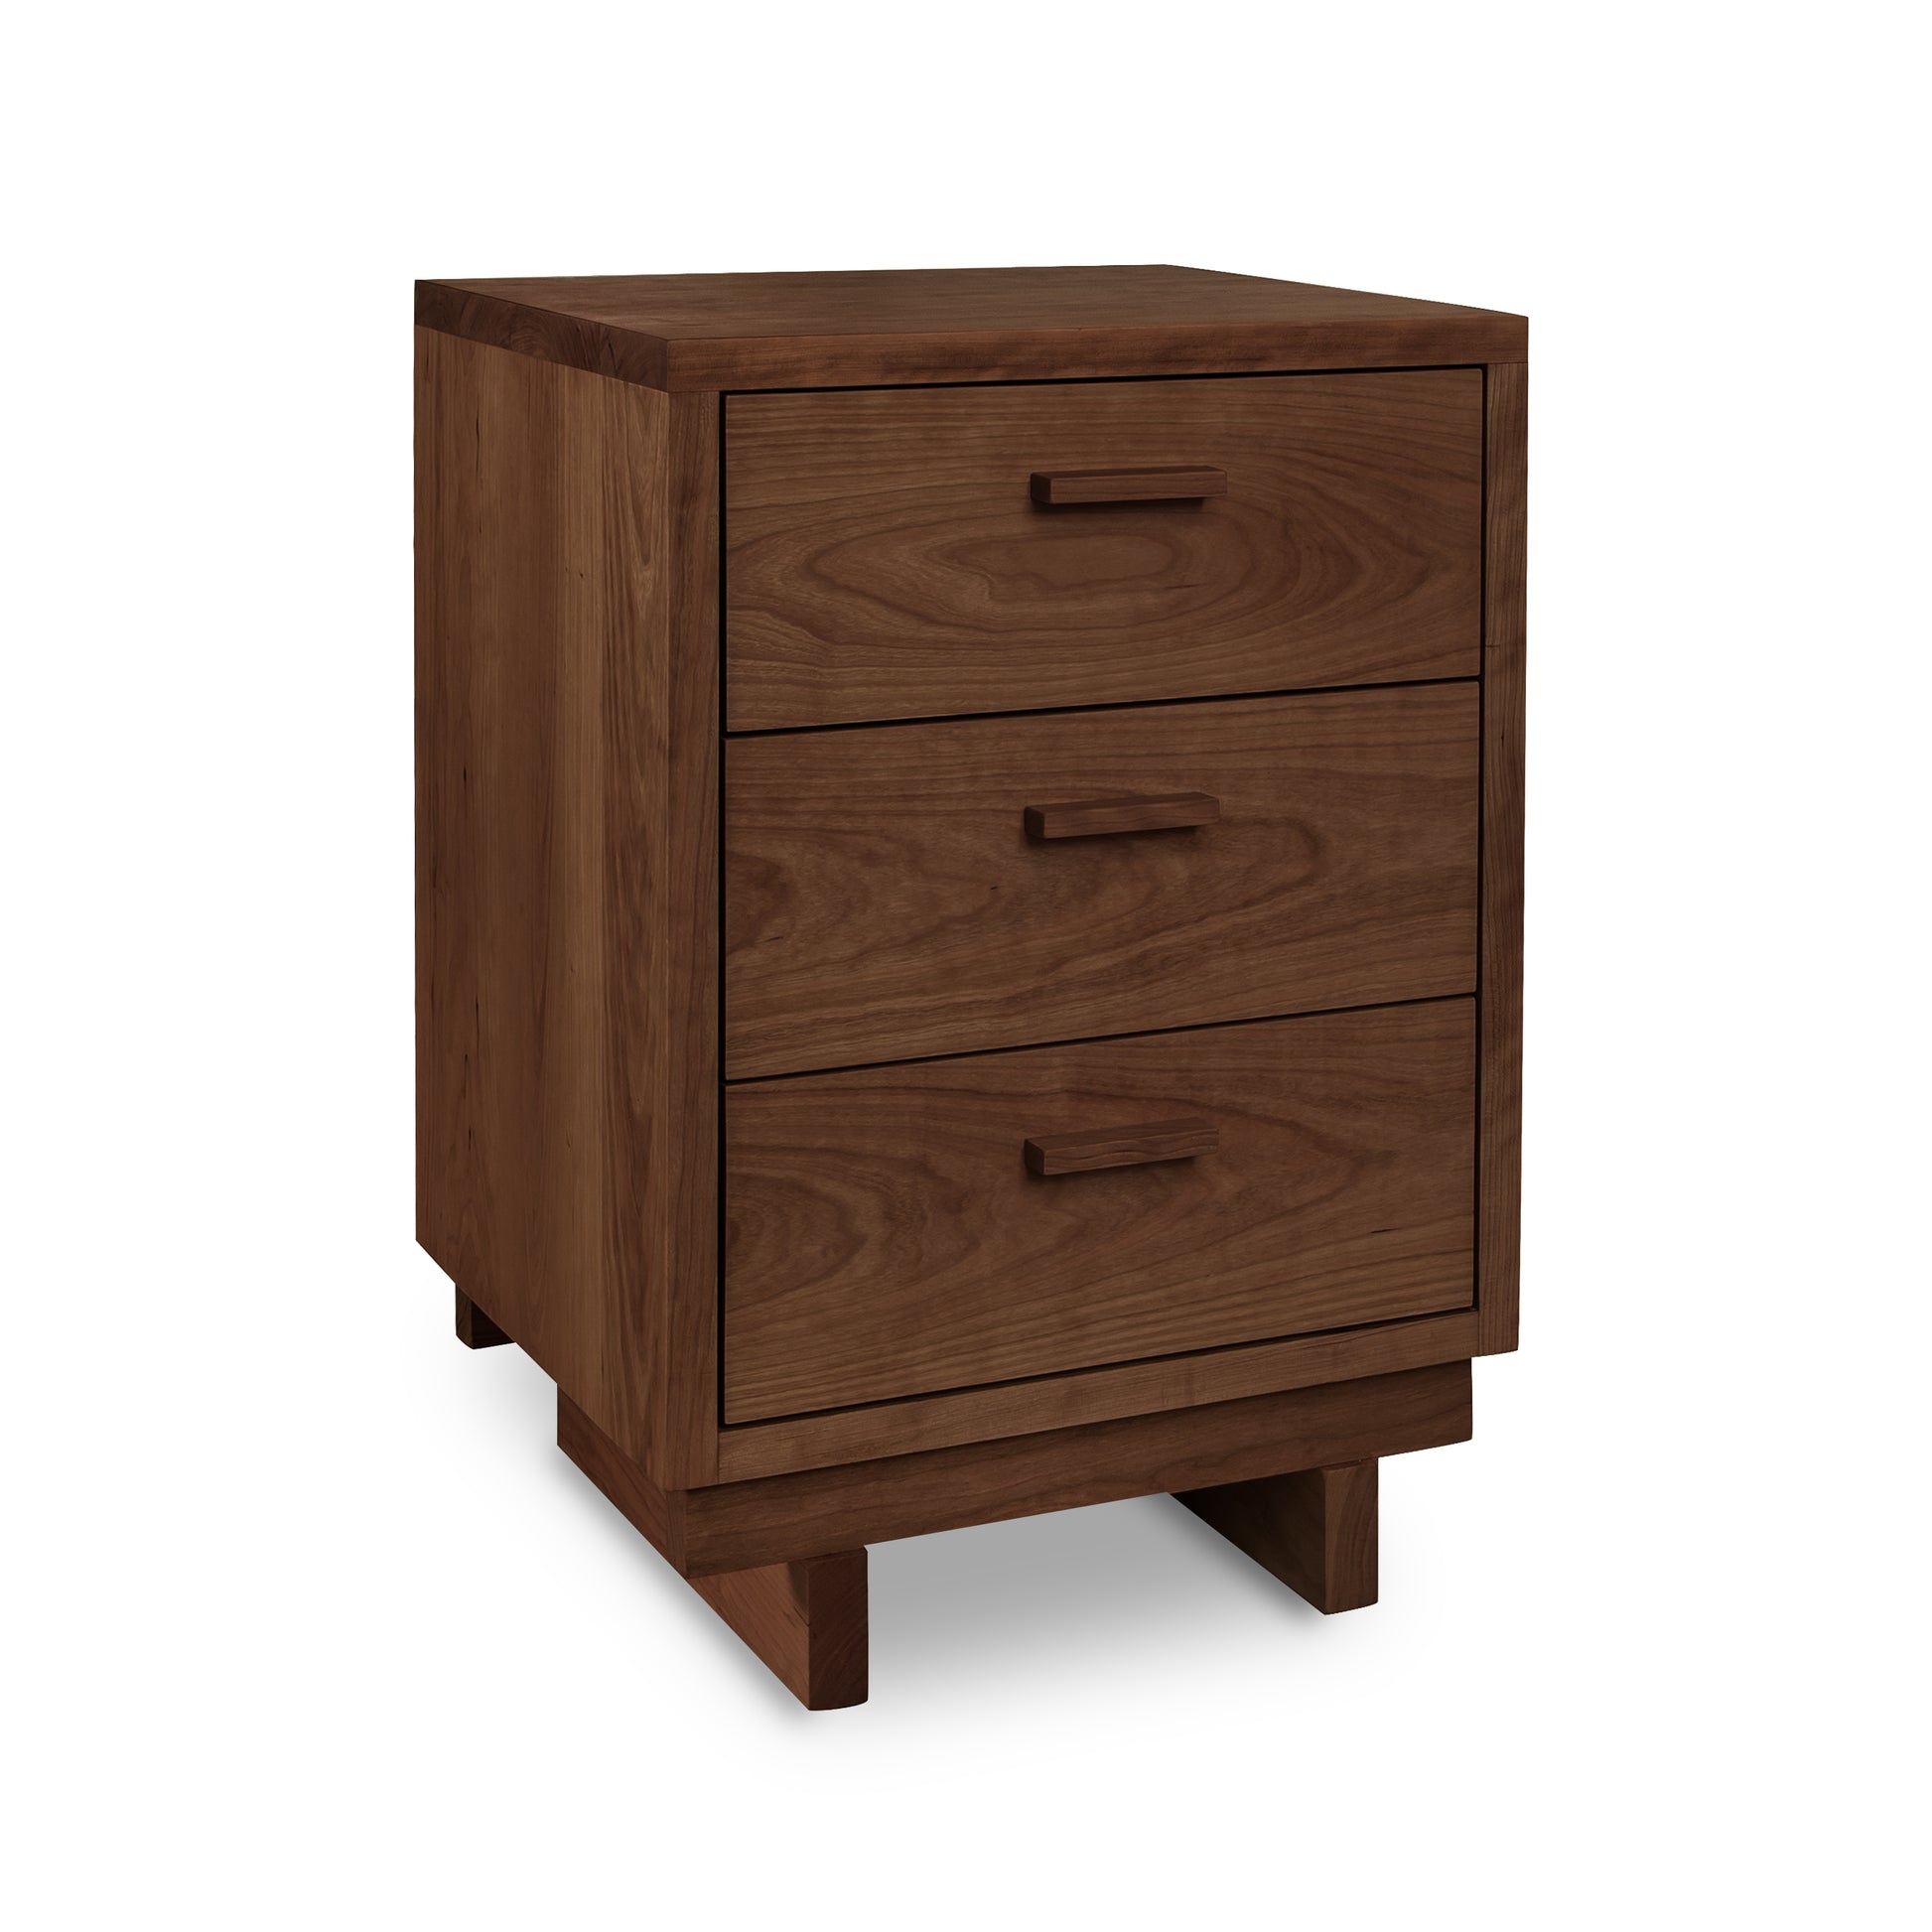 A modern design Vermont Furniture Designs Loft 3-Drawer Nightstand, isolated on a white background.